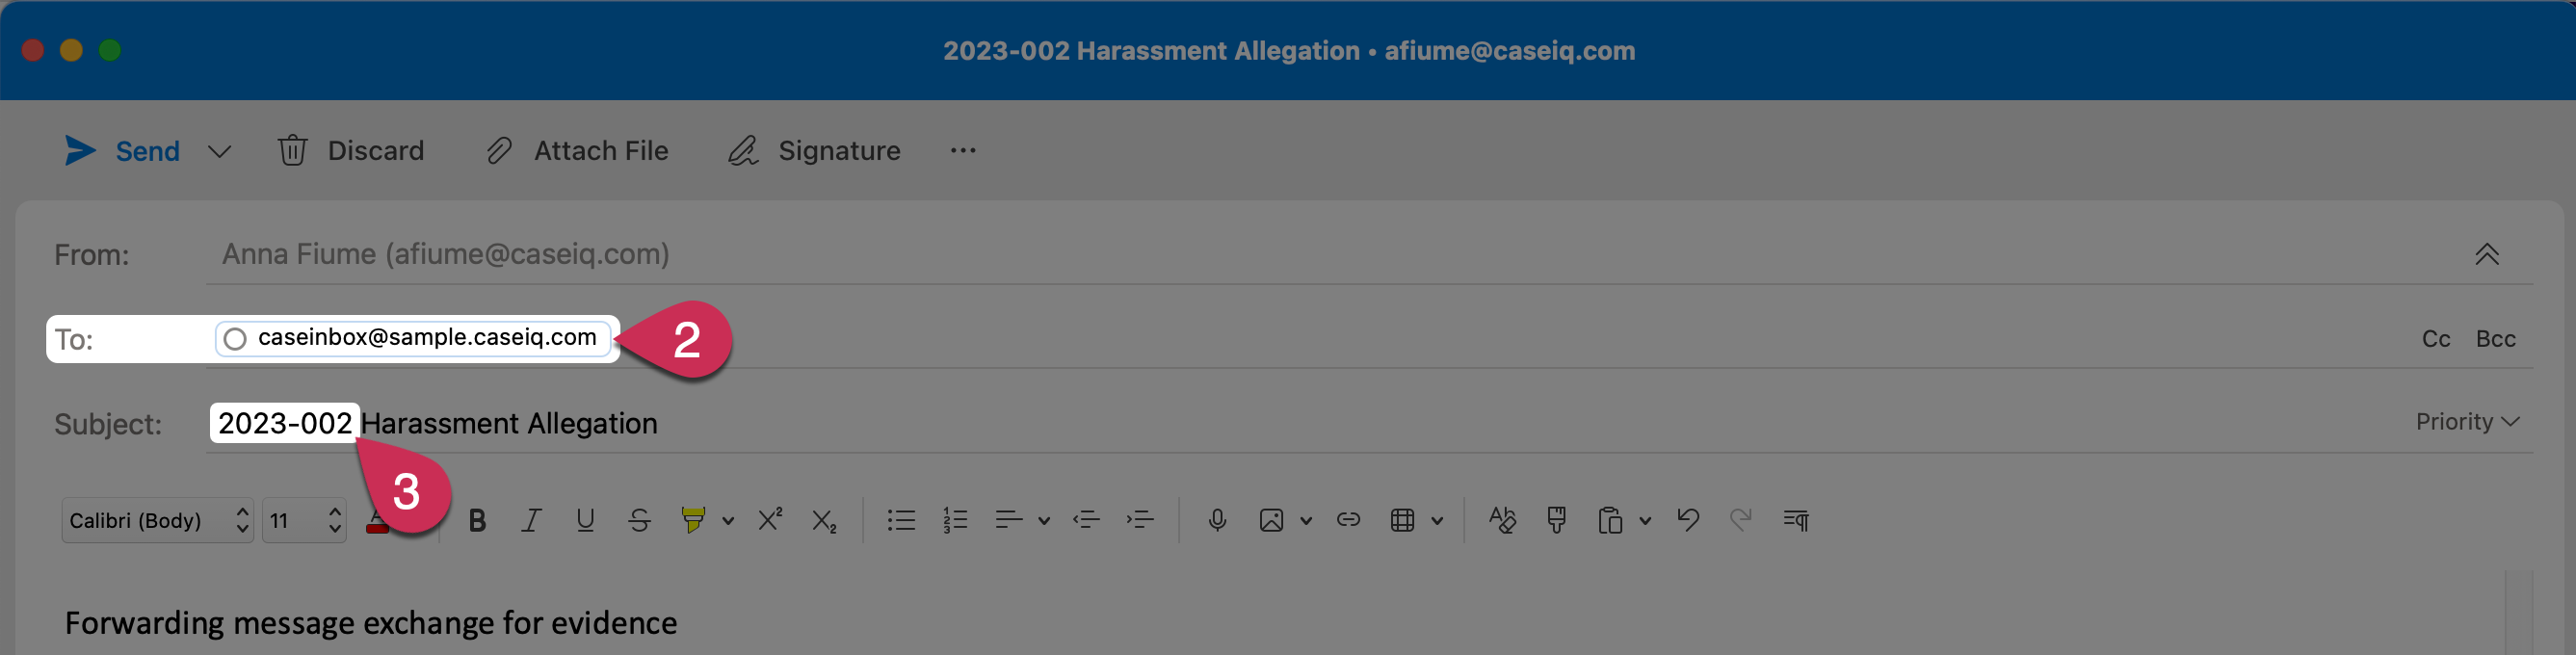 An email draft in Outlook. The recipient is "caseinbox@sample.caseiq.com" and the subject line reads: "2023-002 Harassment Allegation".